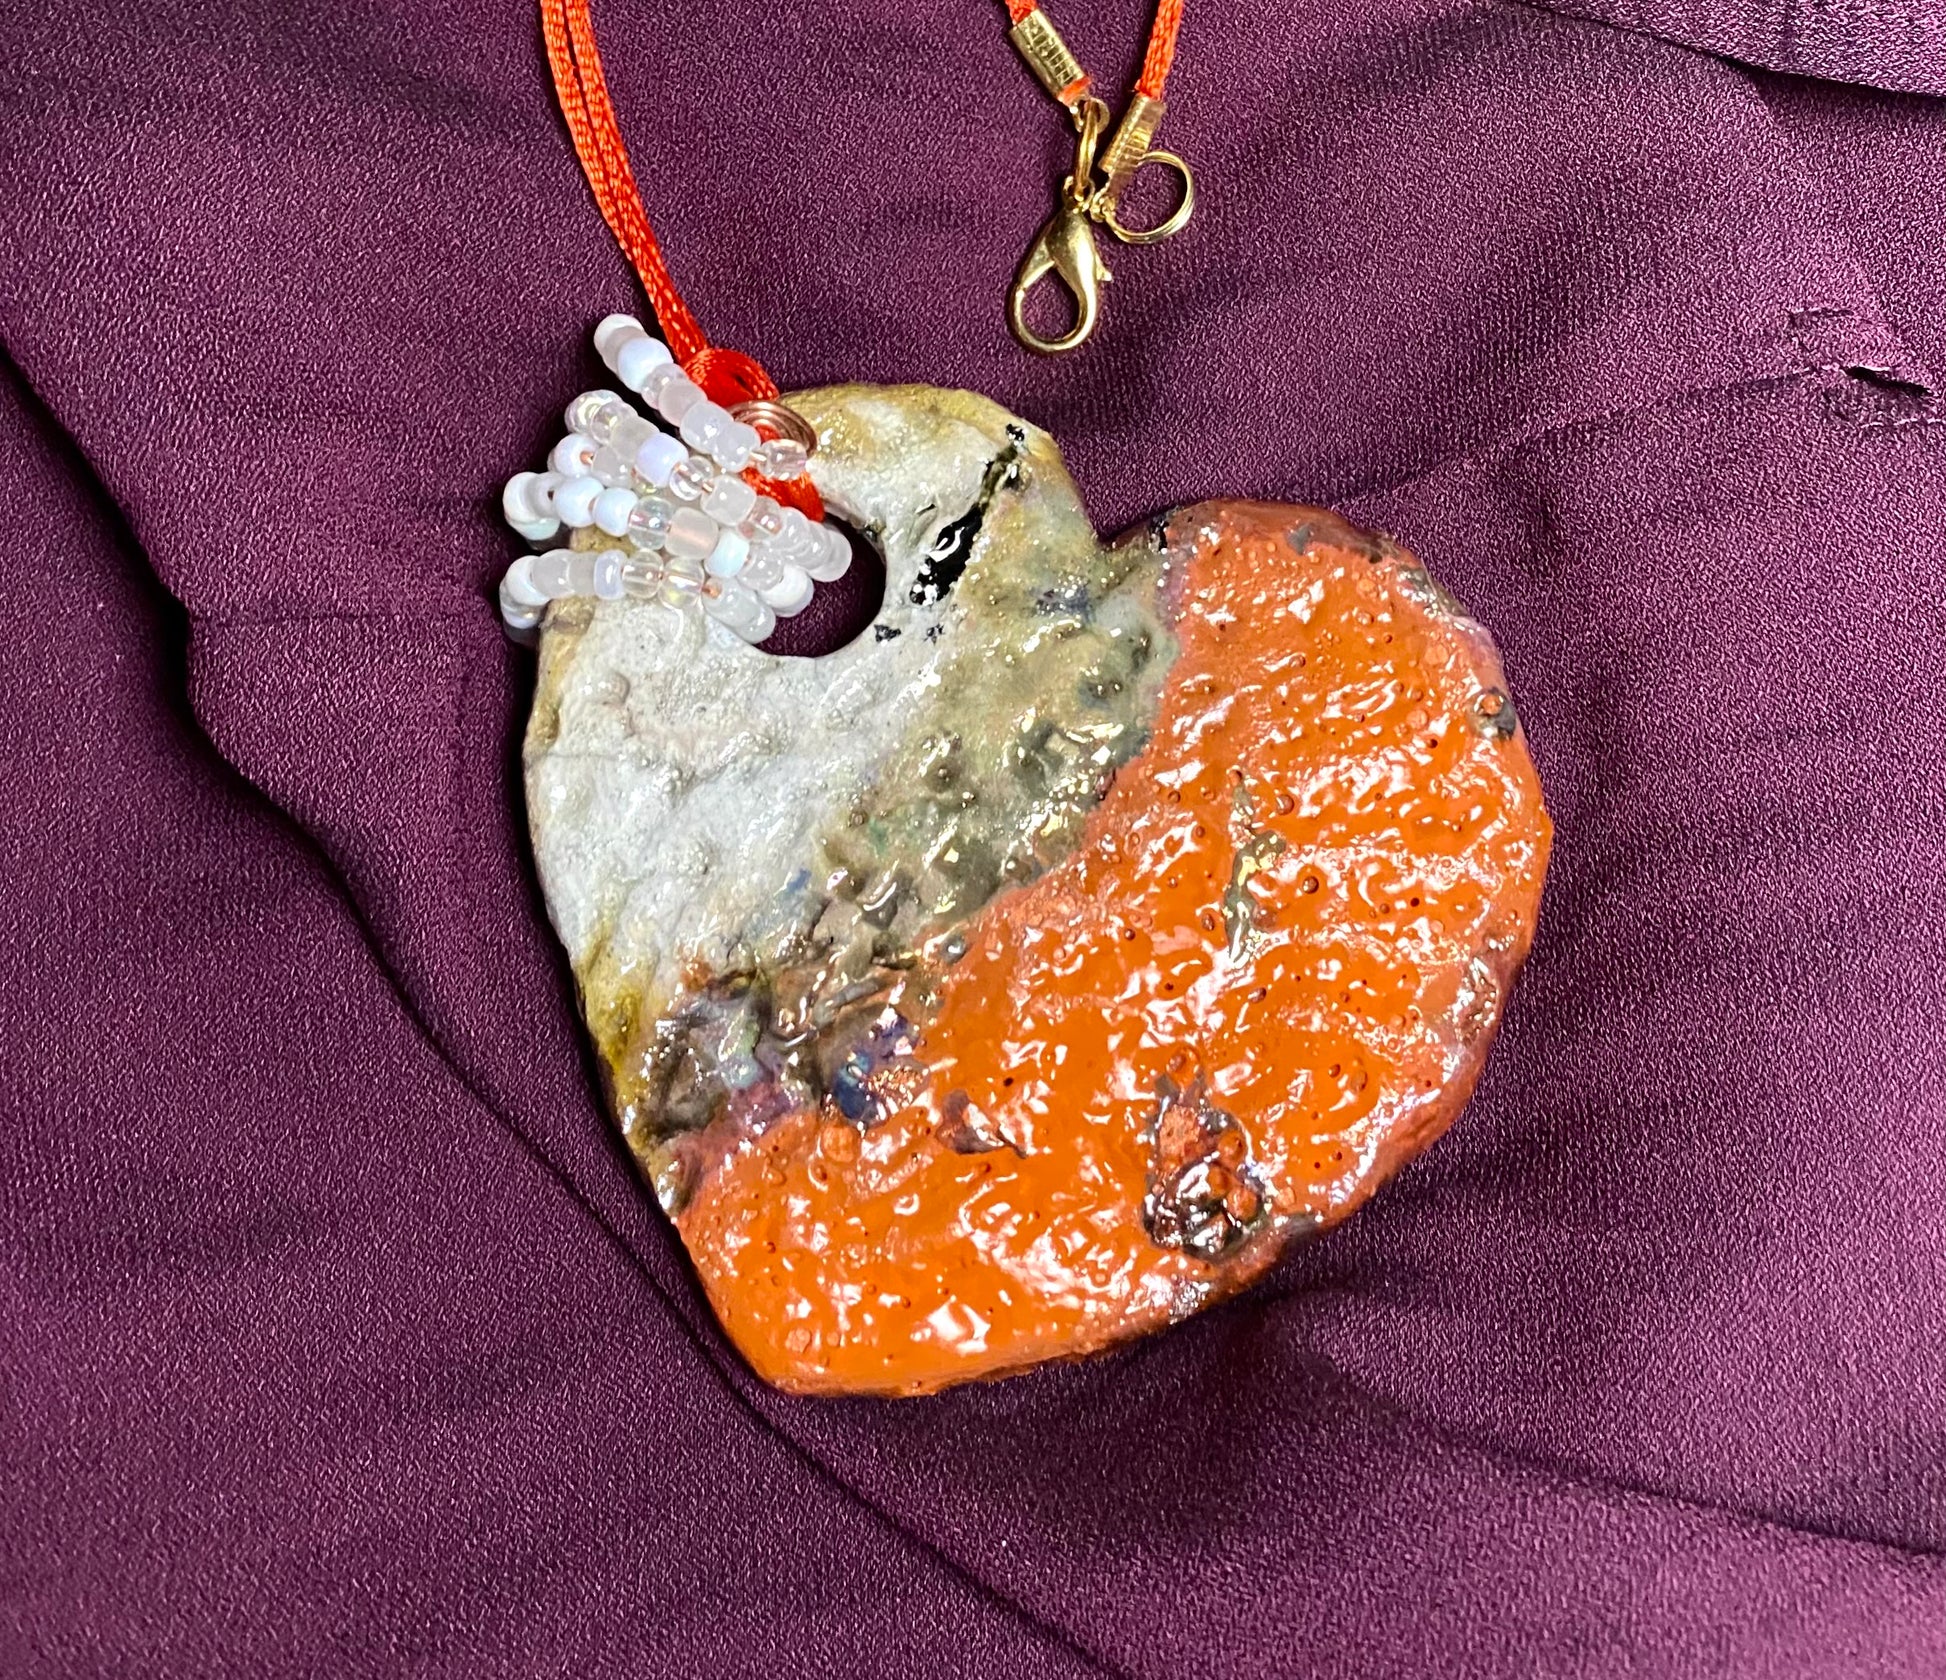  Have A Heart ! Each heart pendant is handmade with love! It is 3"x 3"and weighs approx. 3ozs. This pendant has a red violet and gold metallic raku glazes that renders a unique translucent  patina. The heart has a textured pattern . Both sides are  are different and equally beautiful! It holds a spiral of white and clear mini beads on a spiral copper wire. This pendant has a nice 12" red suede cord!